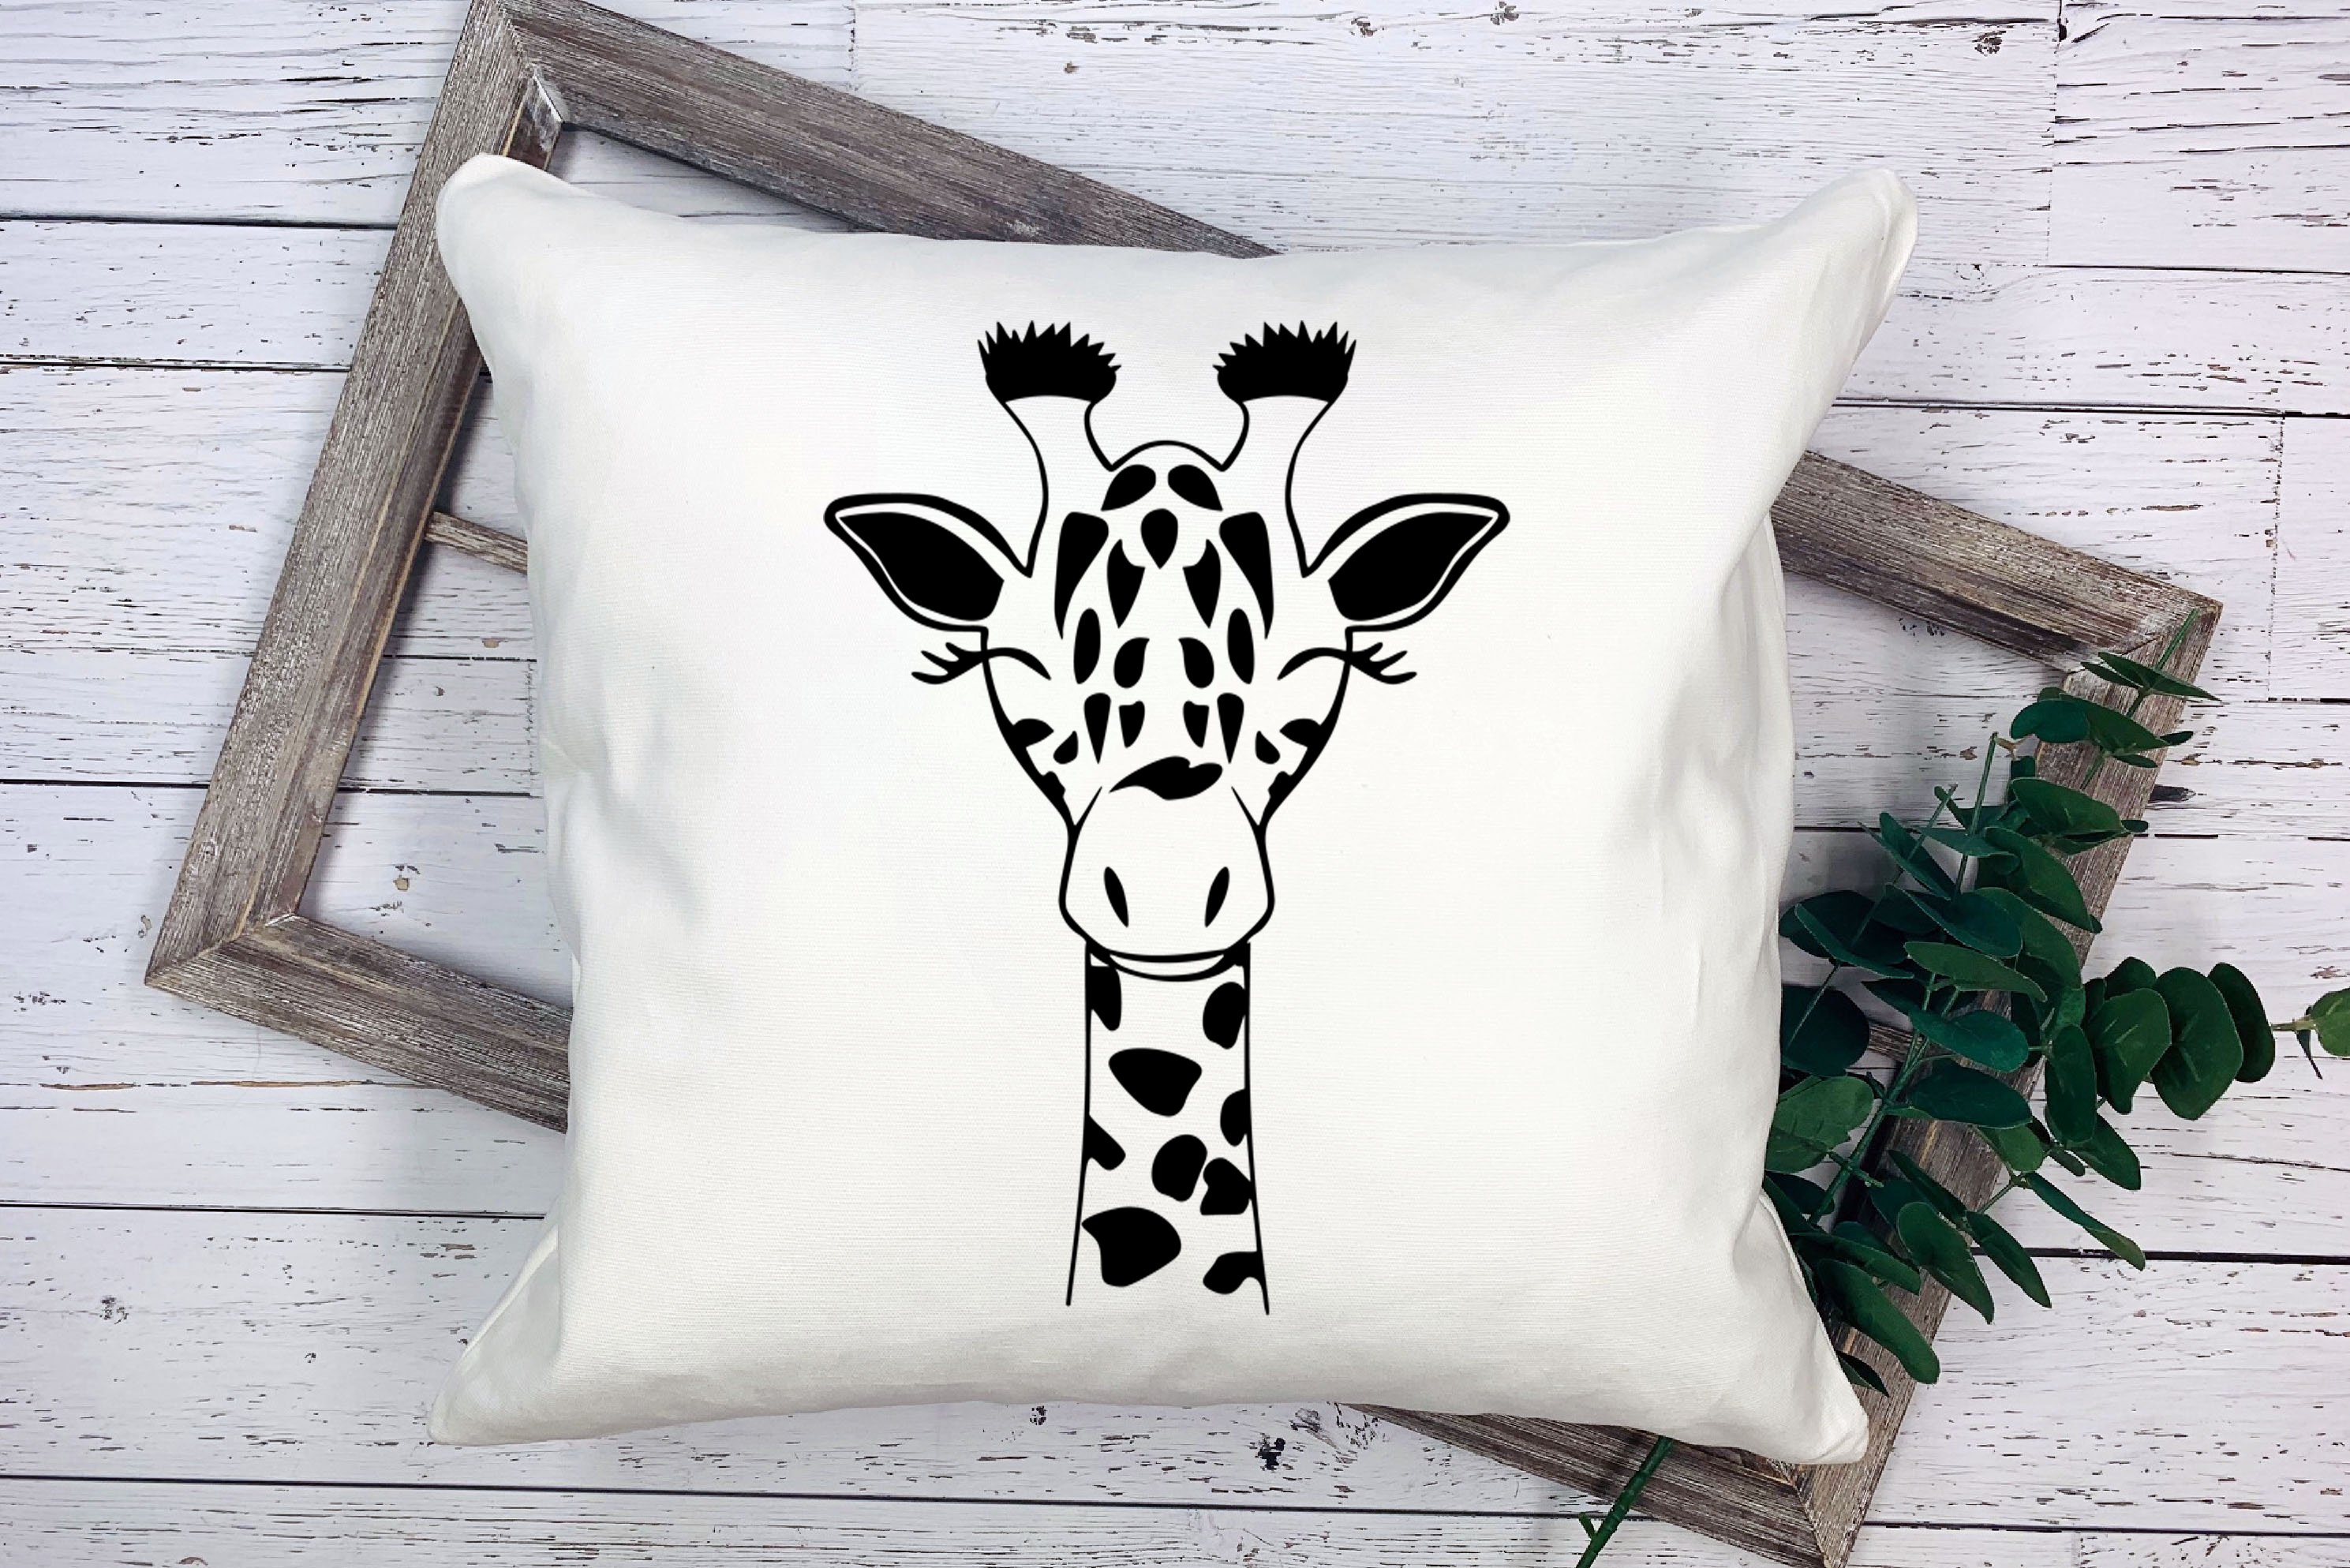 Pillow with a giraffe's head on it.